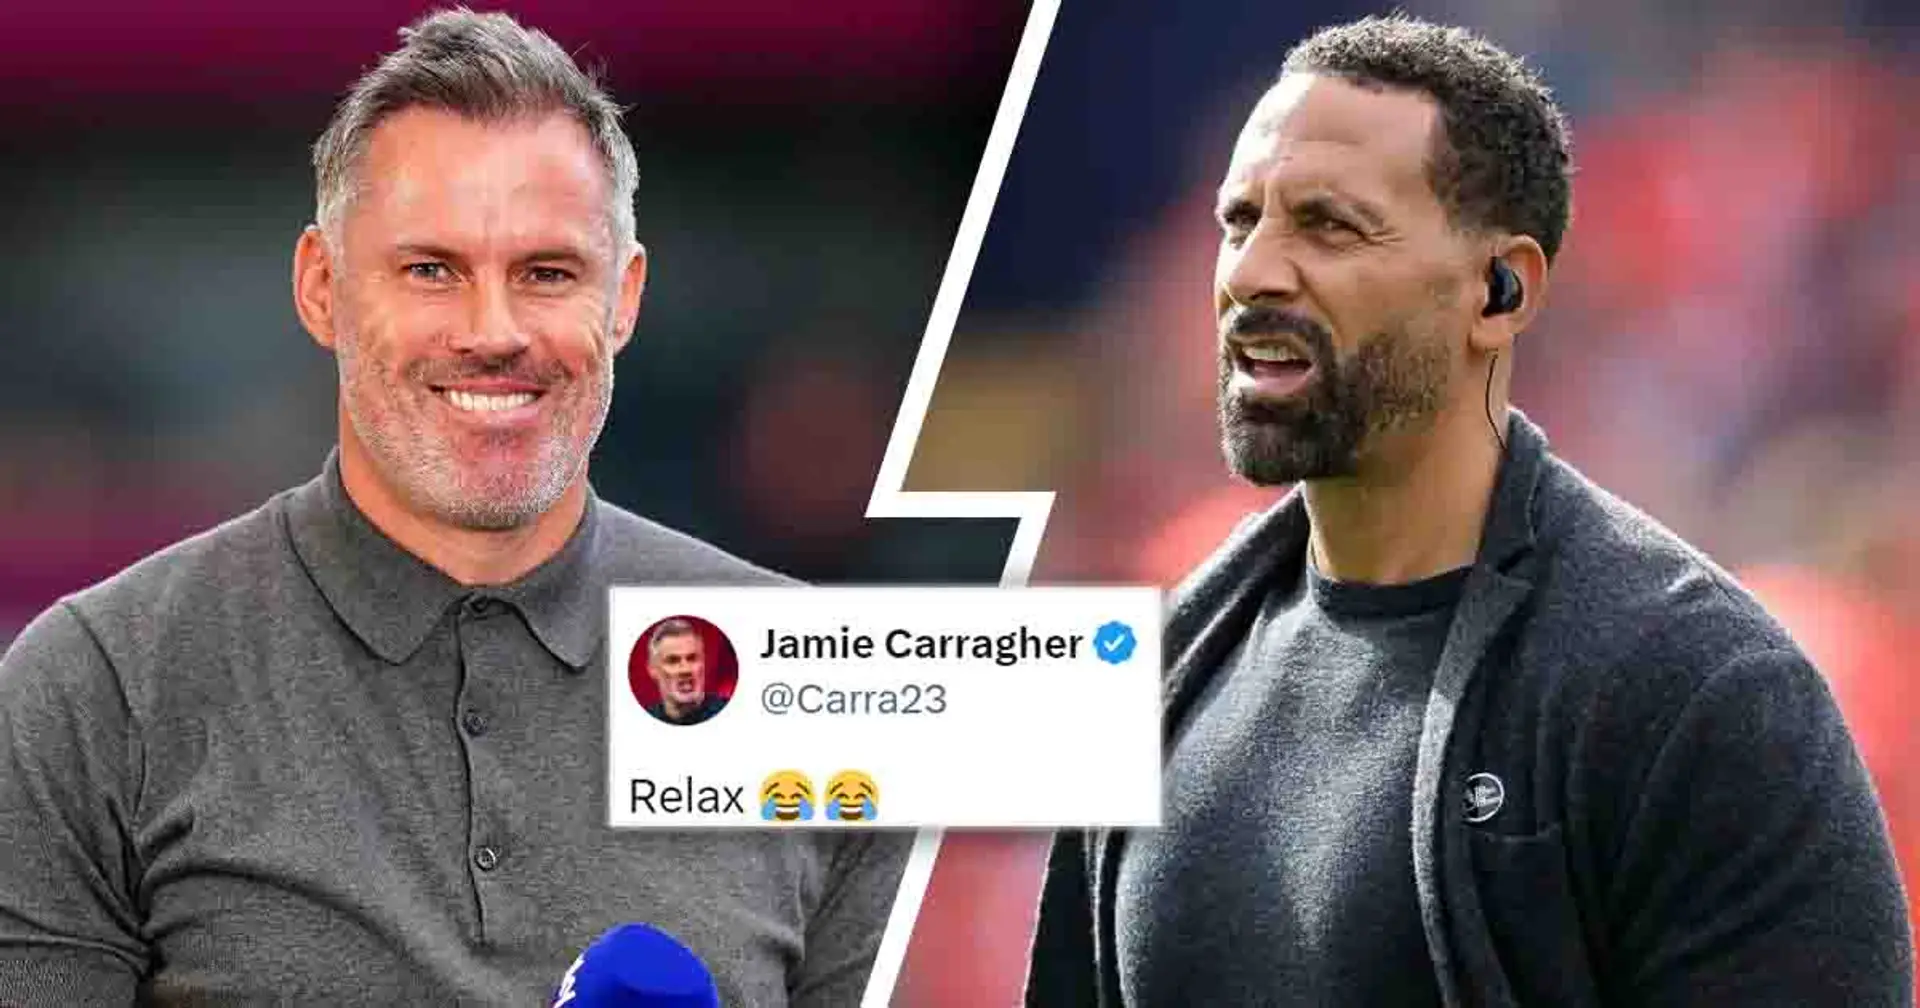 'We have to enjoy these times': Ferdinand bites back at Carragher's shameless dig at Man United's win over Liverpool